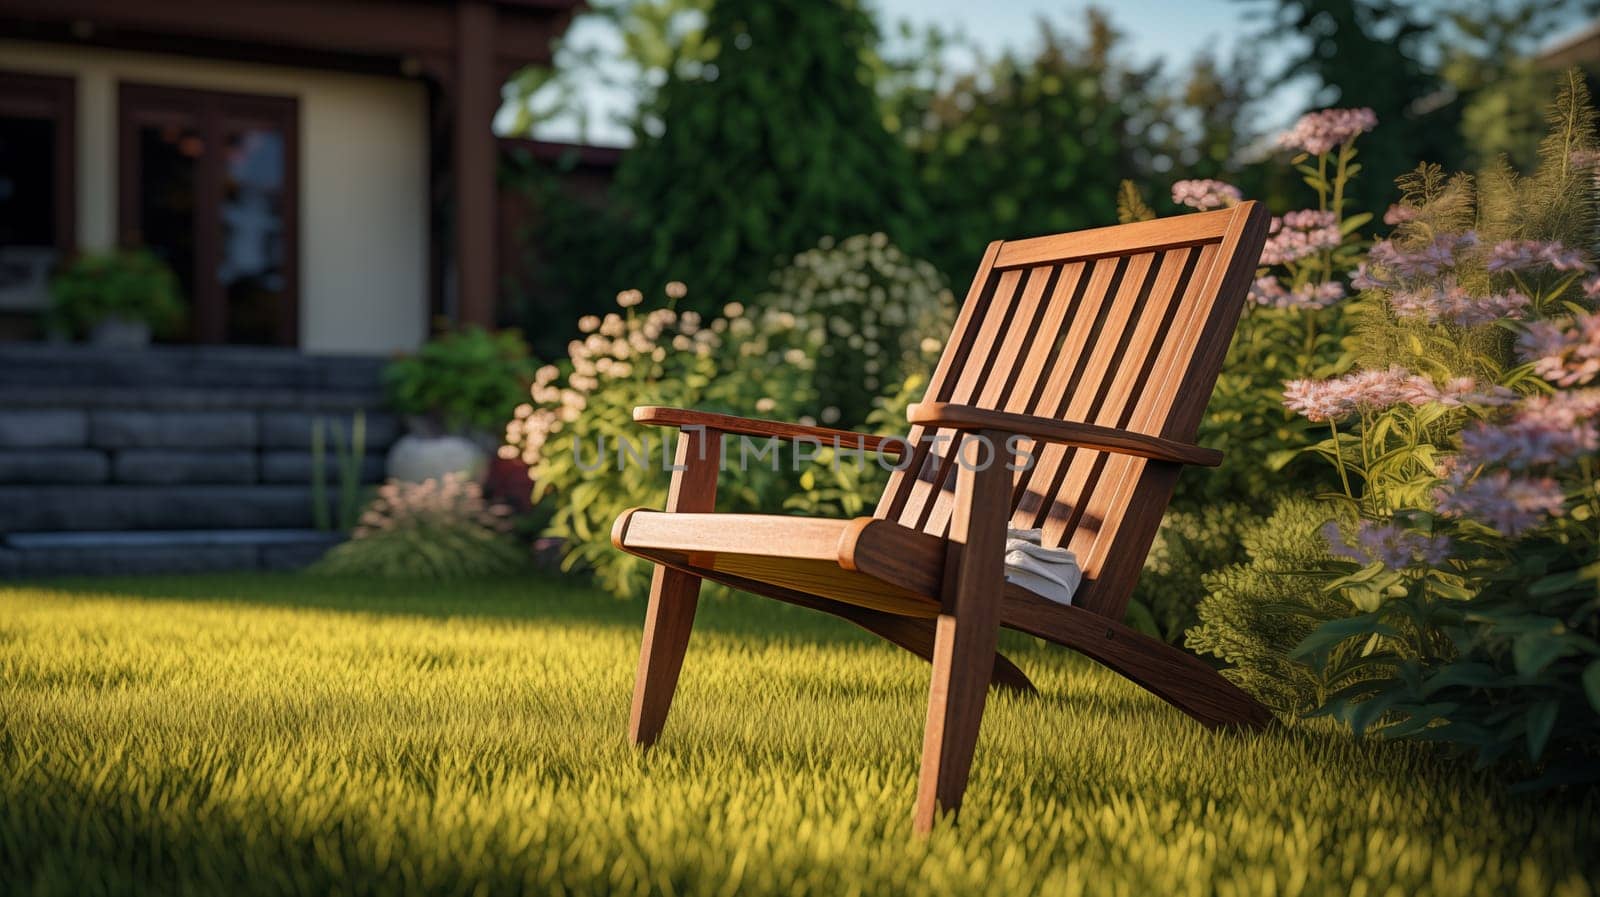 A wooden garden chair in blooming stands on a bright green neat lawn in the garden.